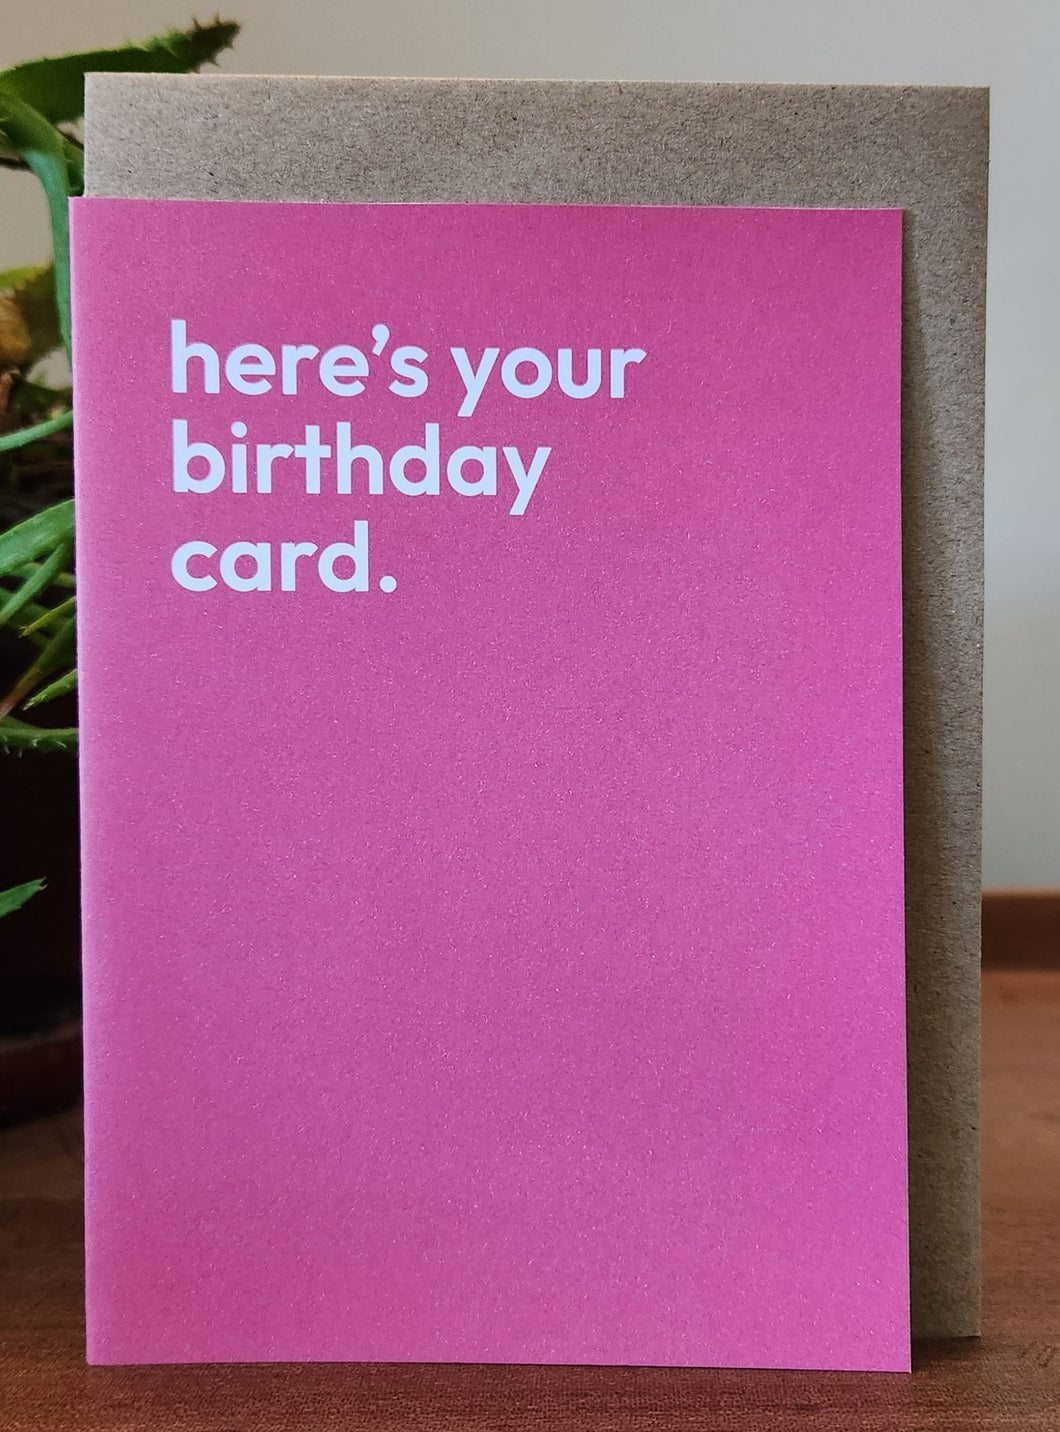 Here's your birthday card - Greeting Card